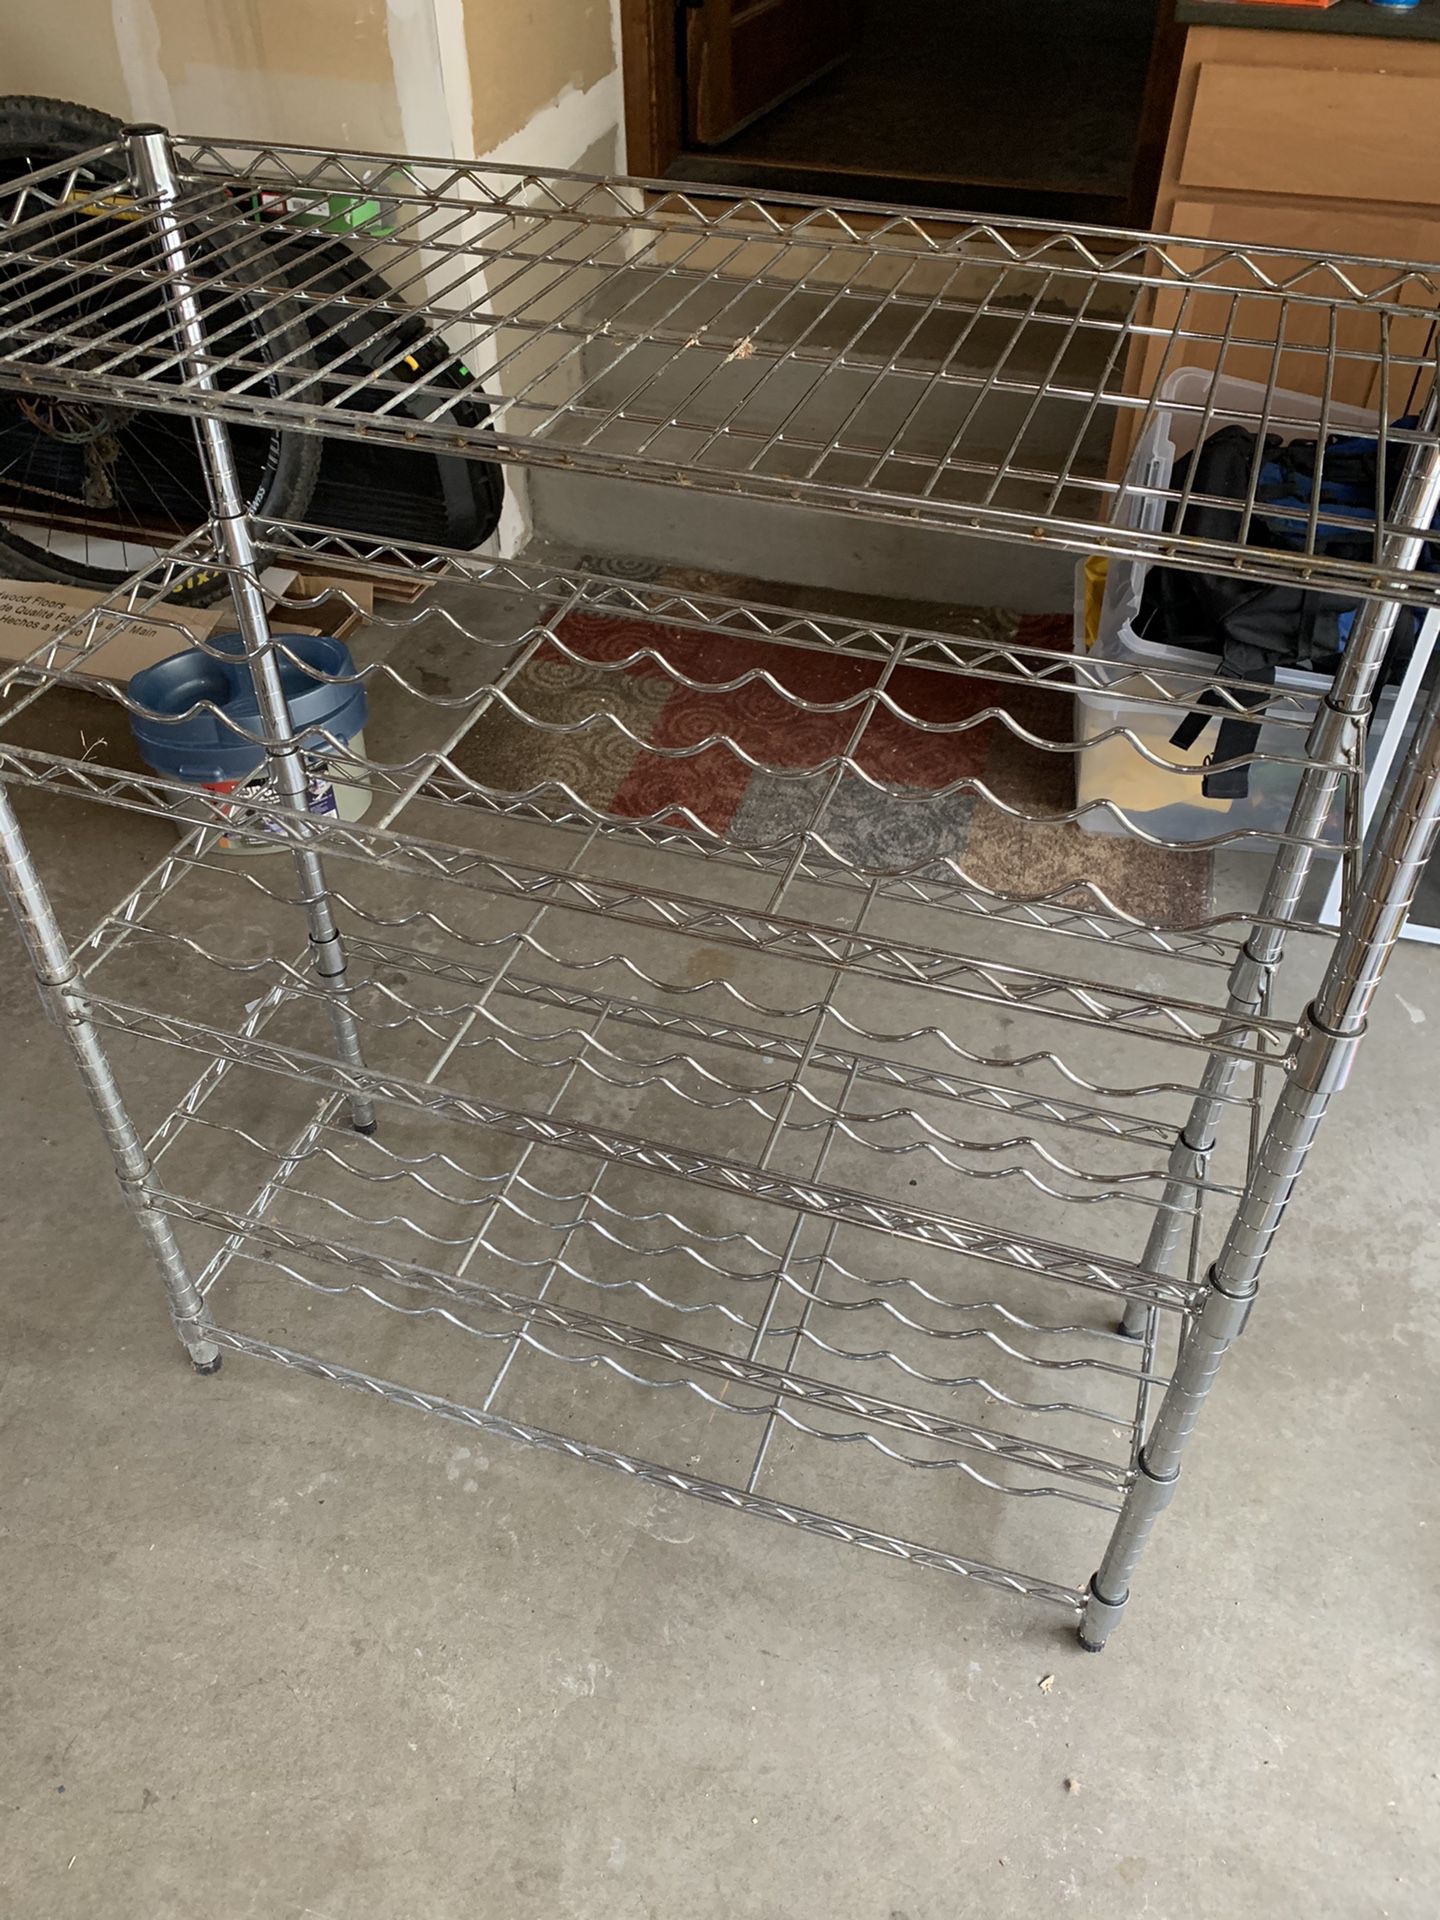 Wine storage rack? Free for the taking!